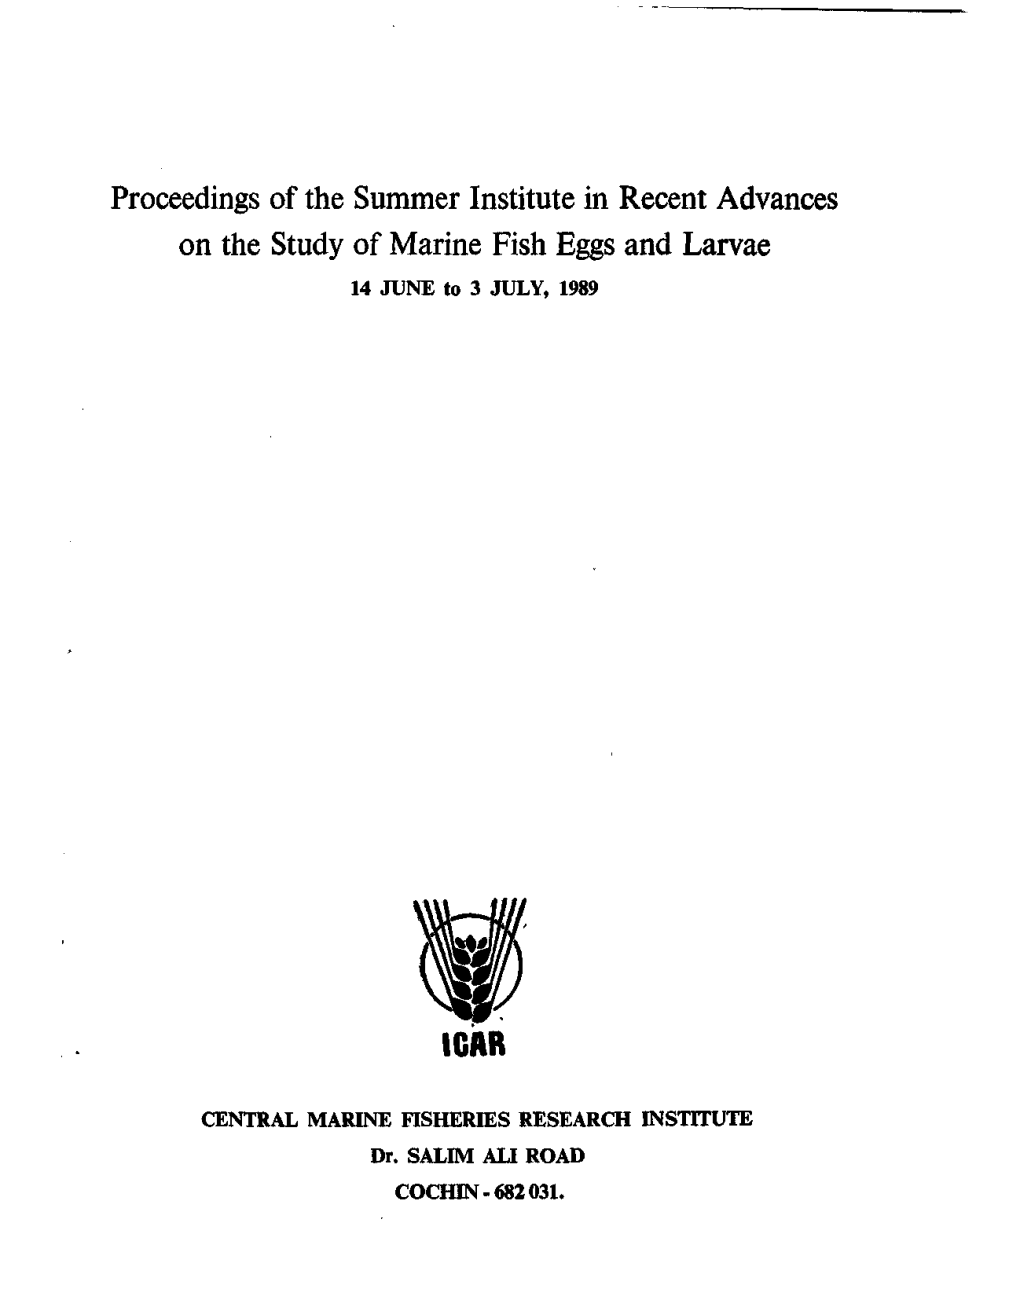 Proceedings of the Summer Institute in Recent Advances on the Study of Marine Fish Eggs and Larvae 14 JUNE to 3 JULY, 1989